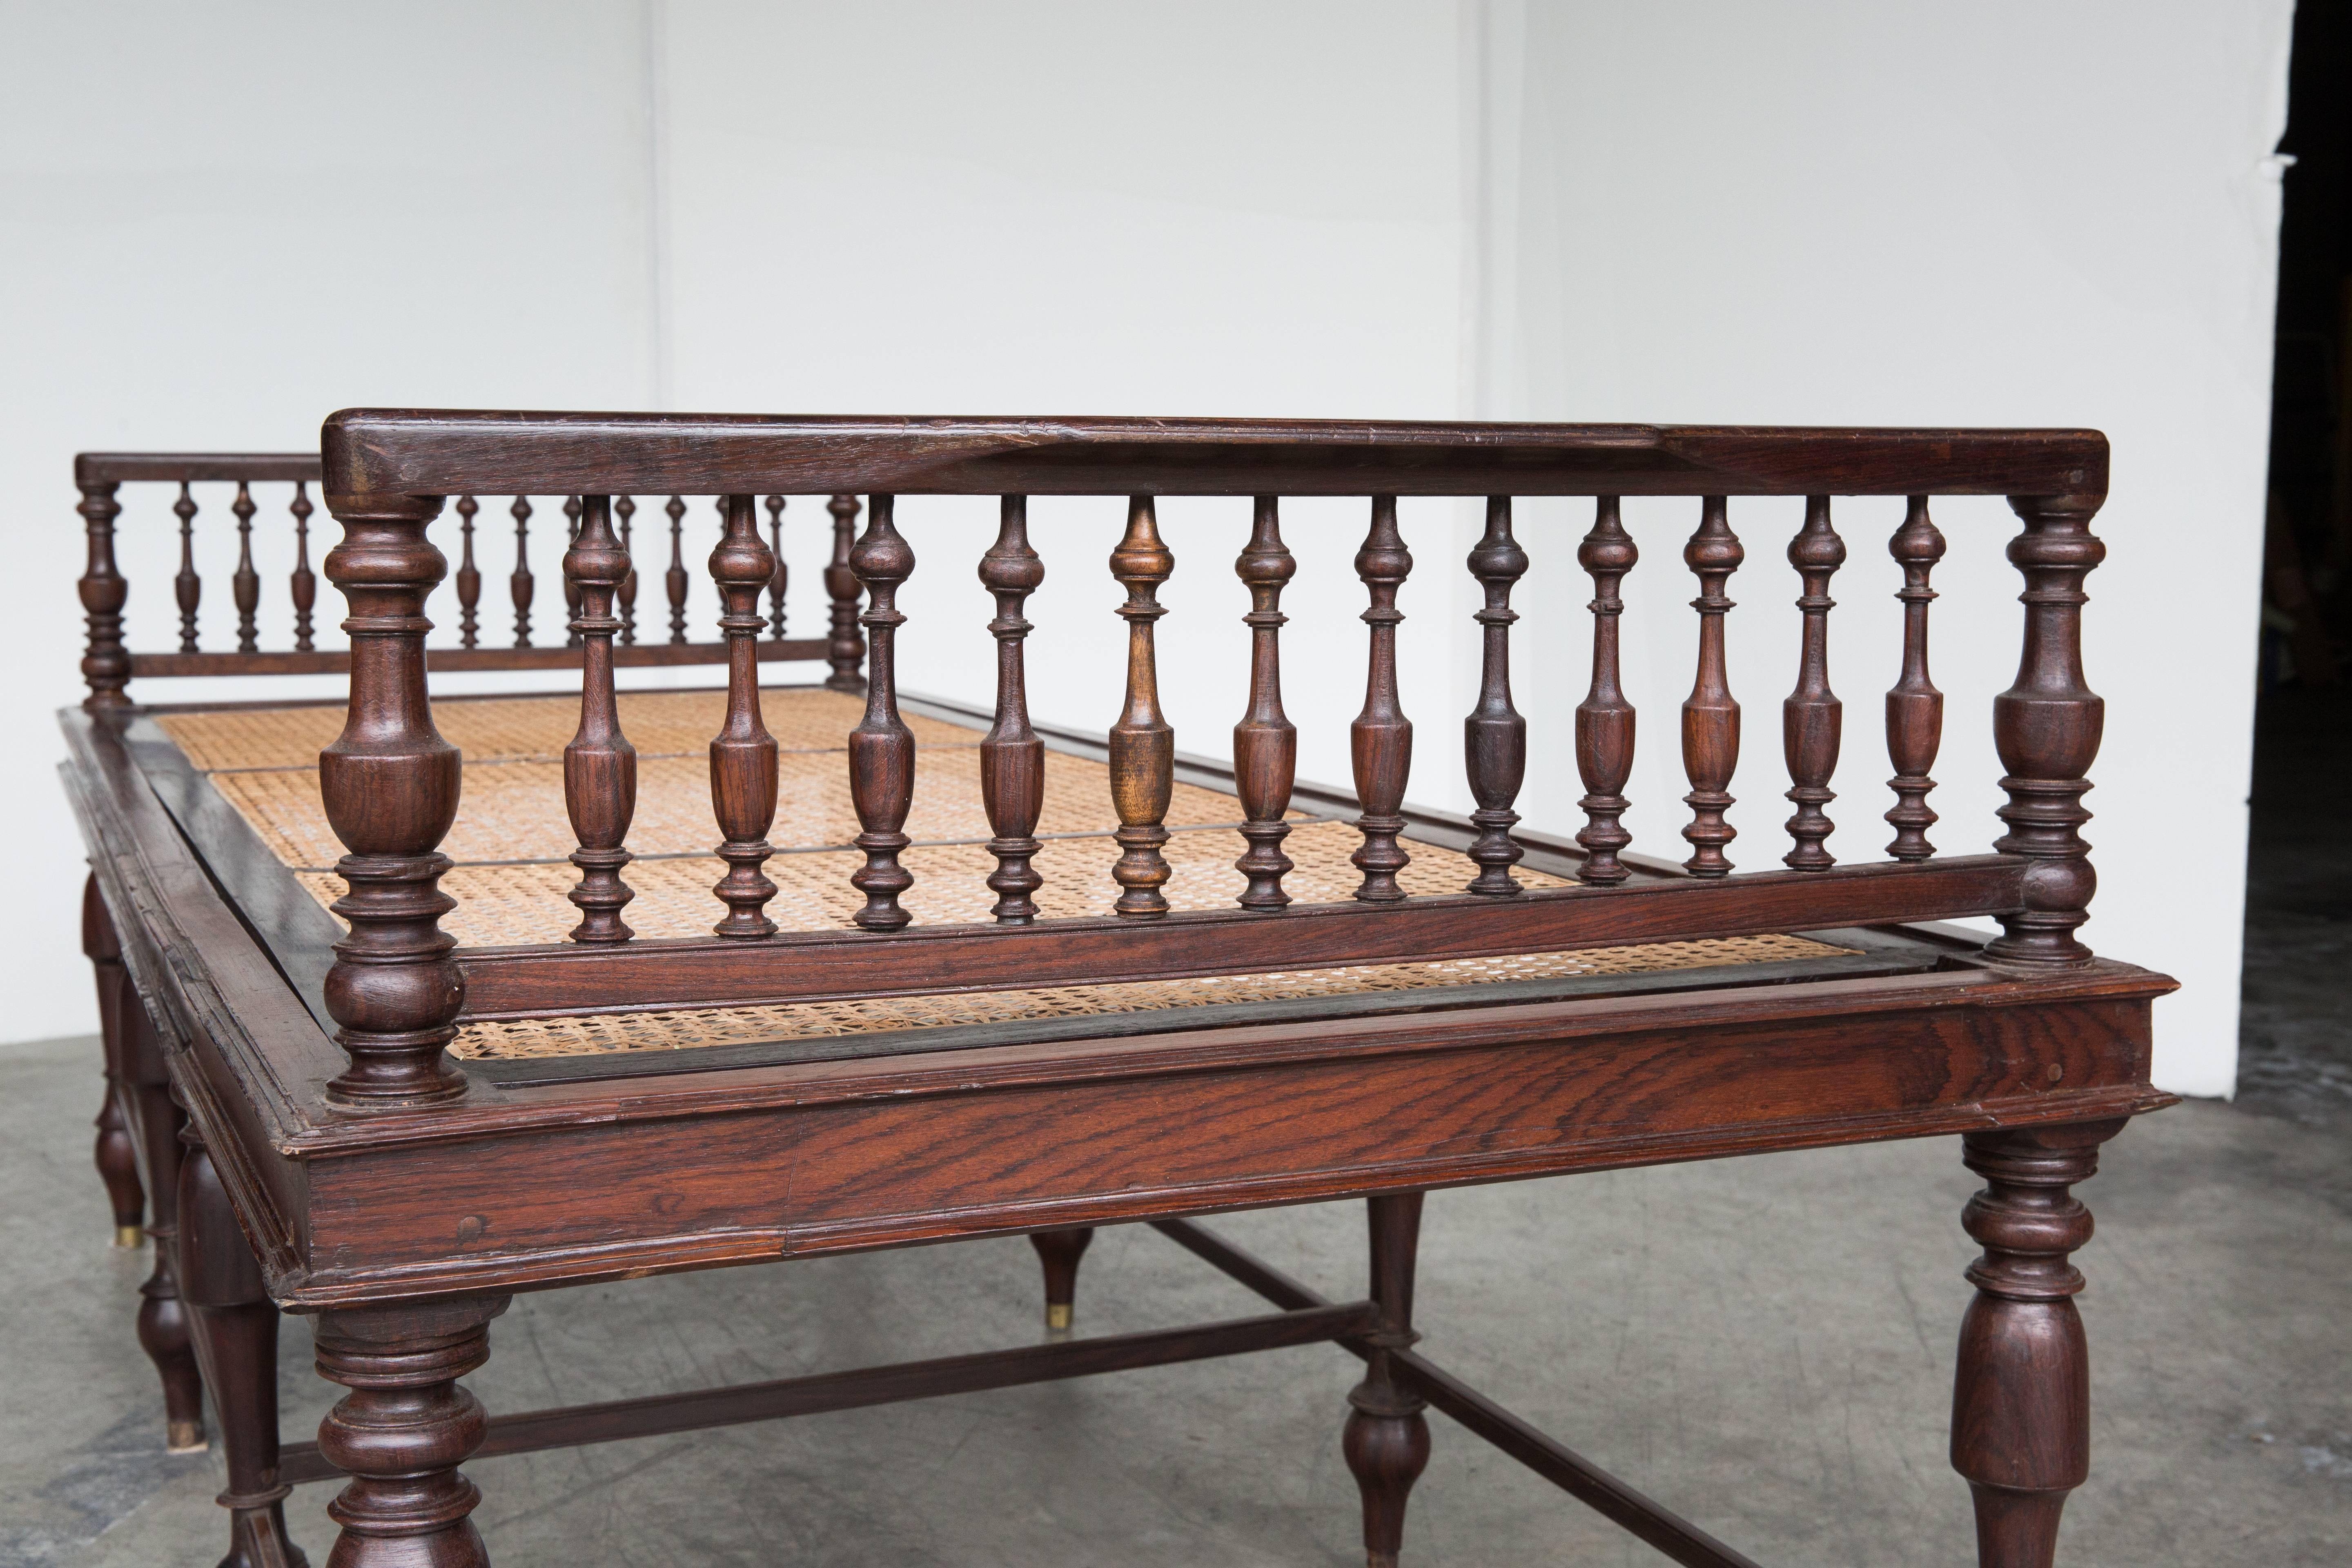 An Anglo-Indian daybed made from rosewood with a newly caned seating area. The headboard and footboard have turned wood spindles as well as the legs. 

The interior dimensions are 71